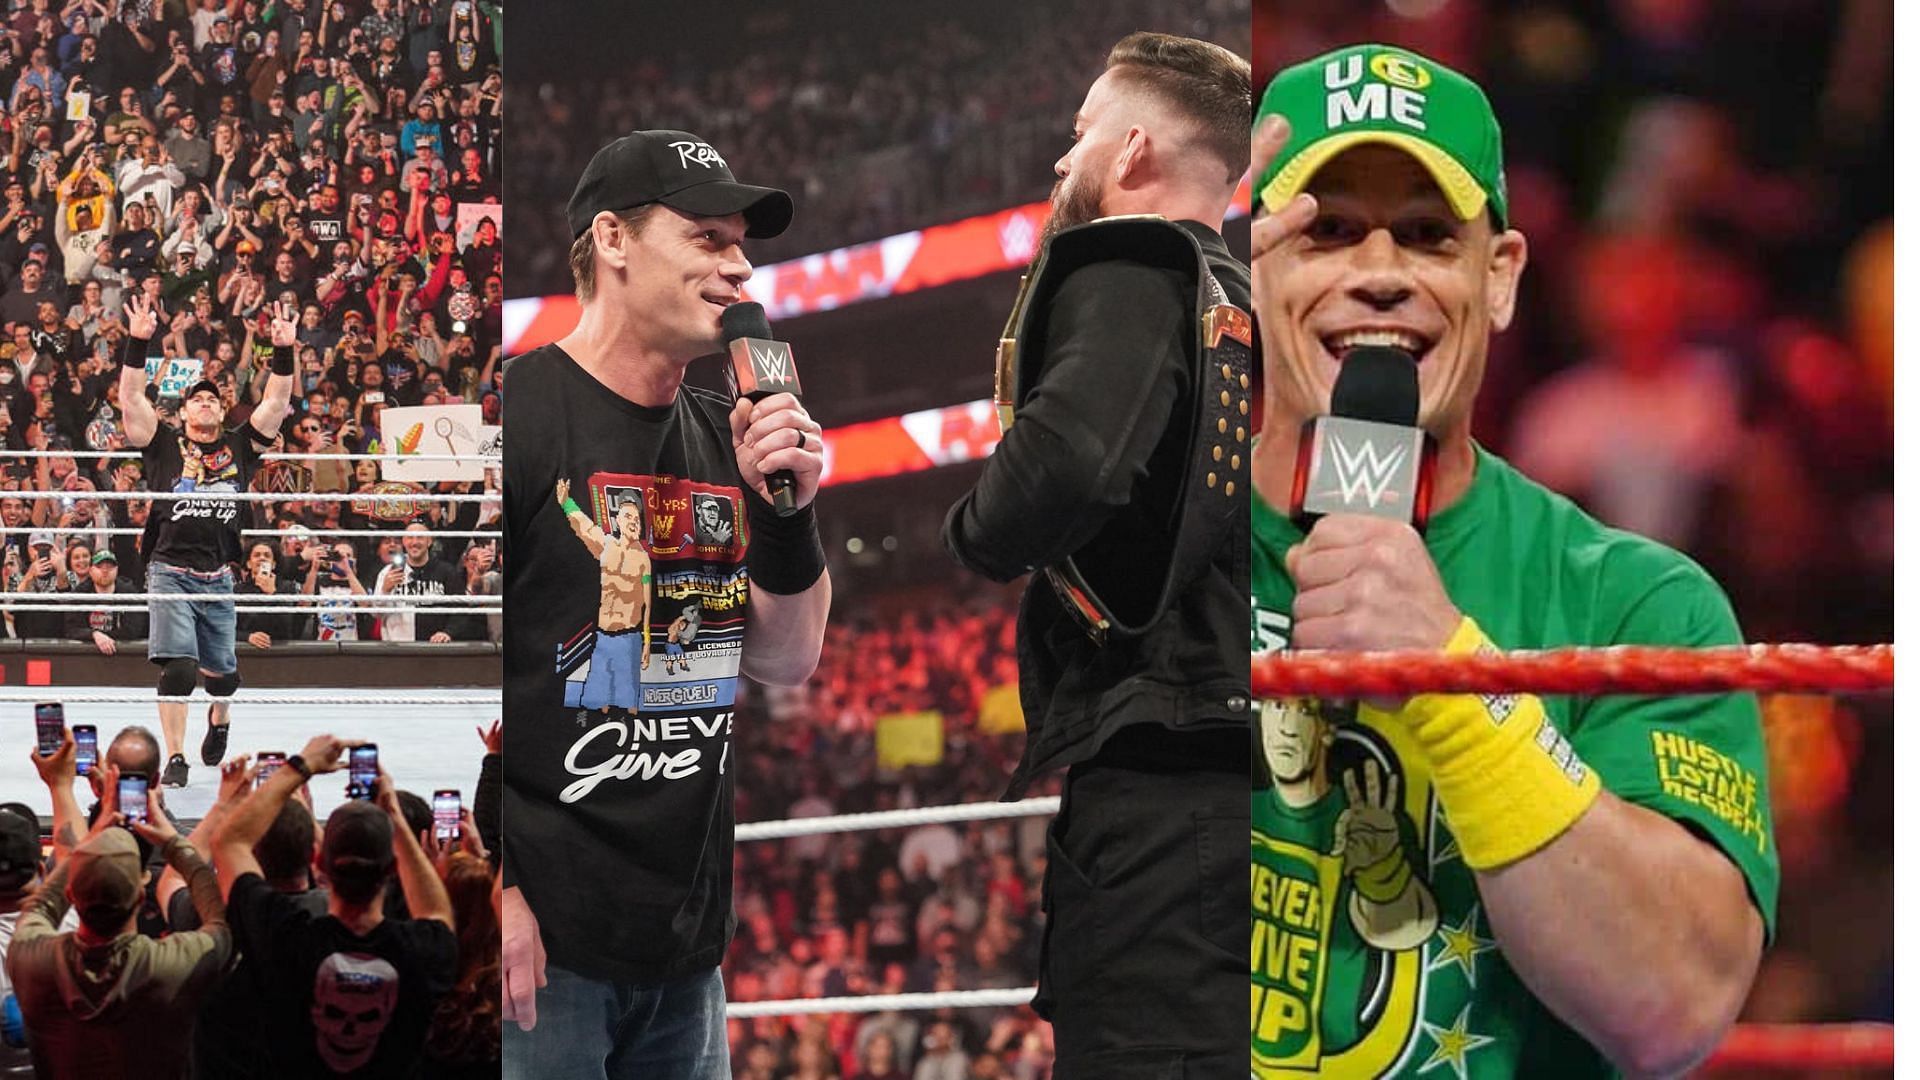 Did an emotional John Cena hint at retirement on RAW?